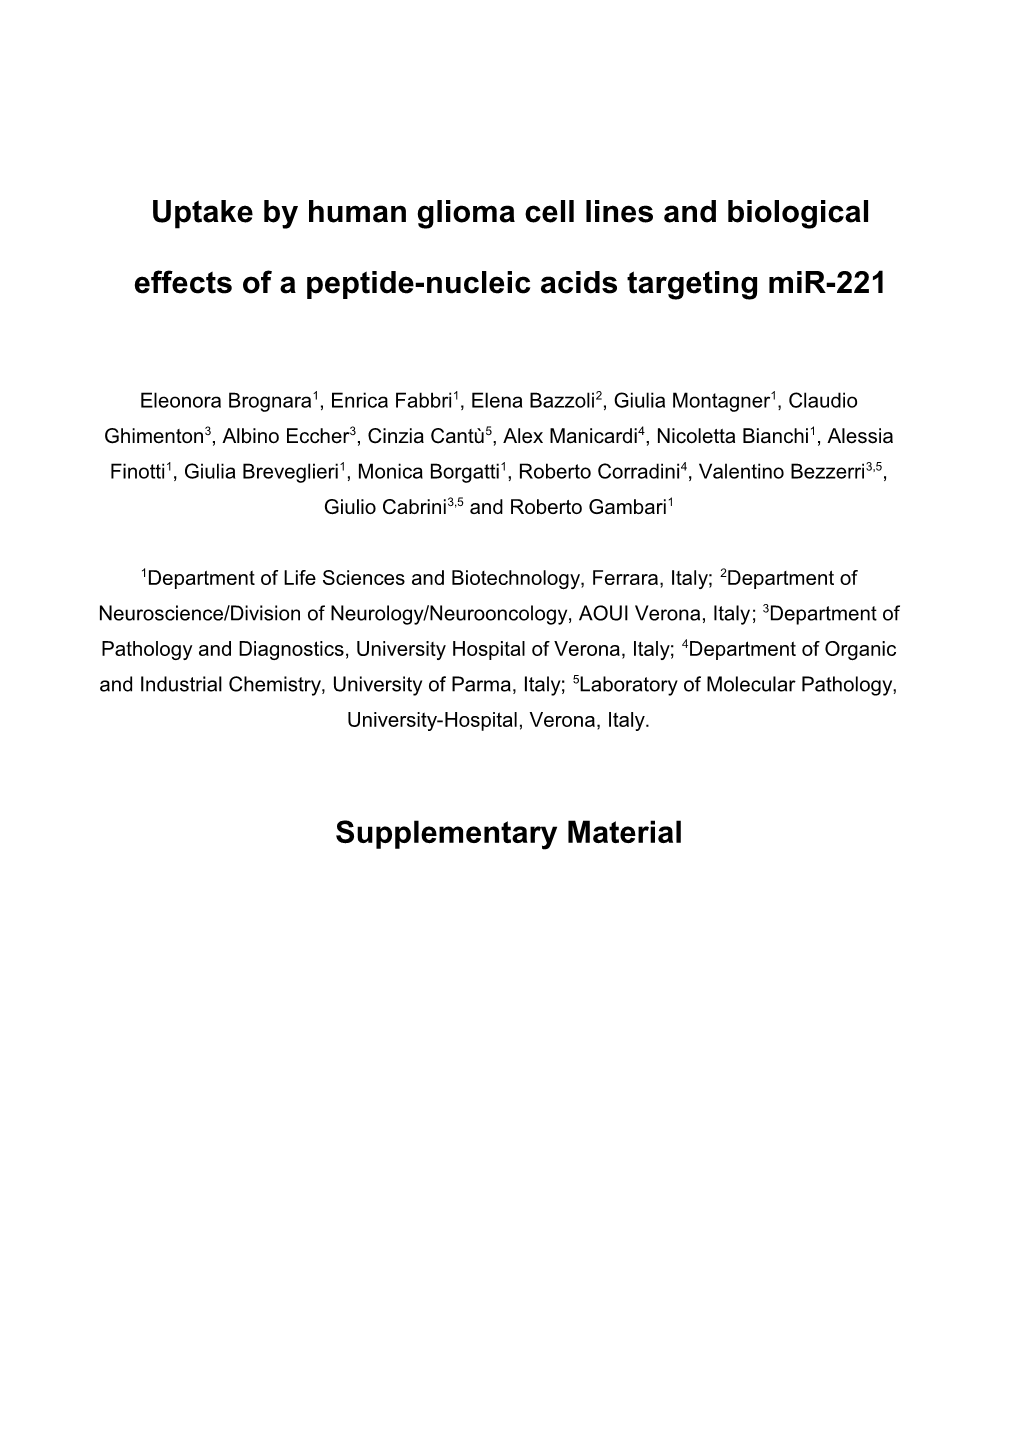 Uptake by Human Glioma Cell Lines and Biological Effects of a Peptide-Nucleic Acids Targeting